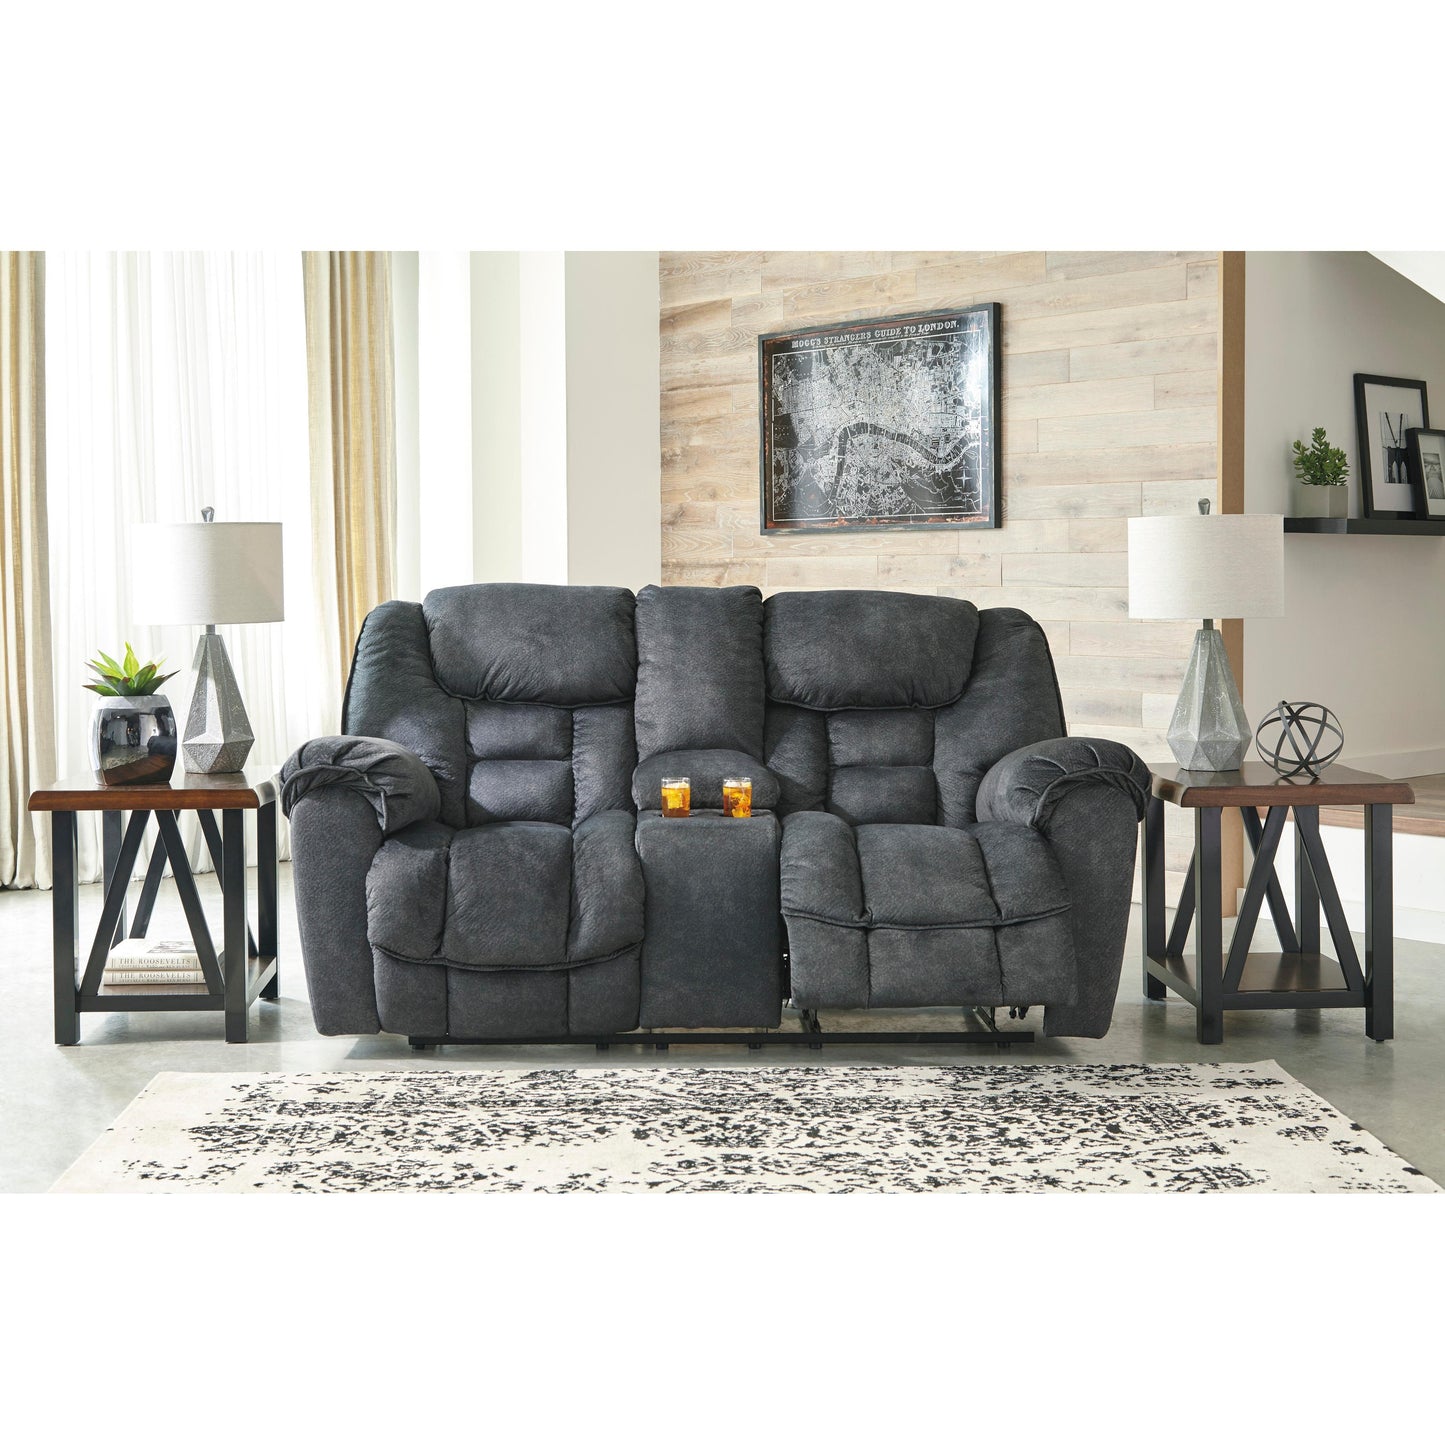 Signature Design by Ashley Capehorn 76902 3 pc Reclining Living Room Set IMAGE 3